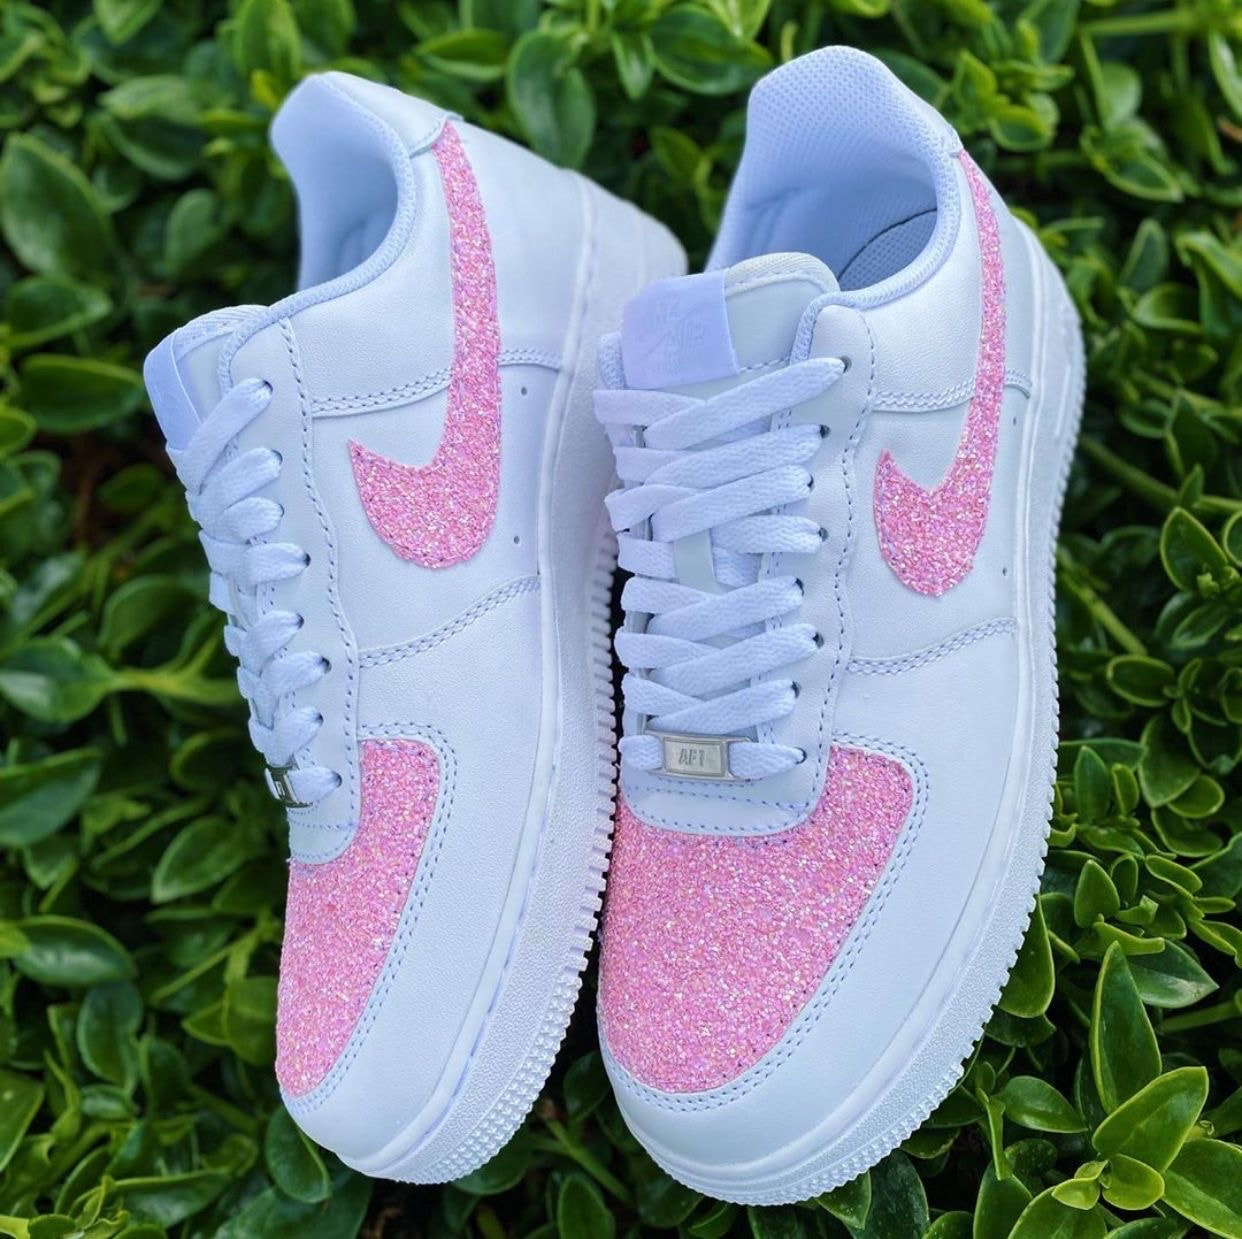 Private Special Order for Lux- Pink Glitter AF1 wmns sz 6 Toebox+Swooshes